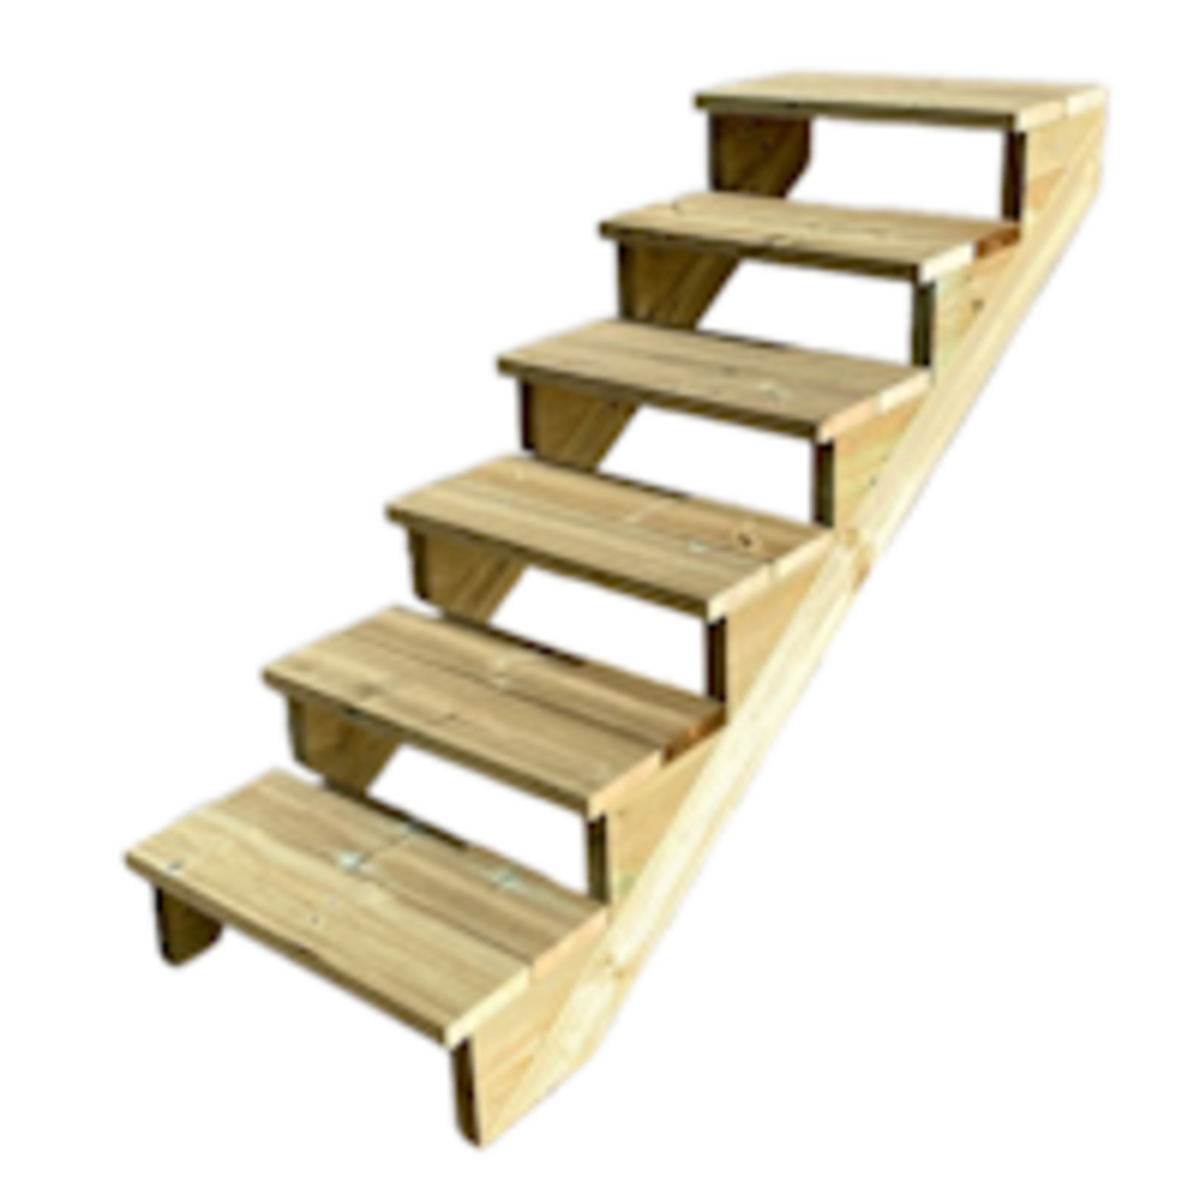 Deck stairs wood 6 steps type C - height 105cm